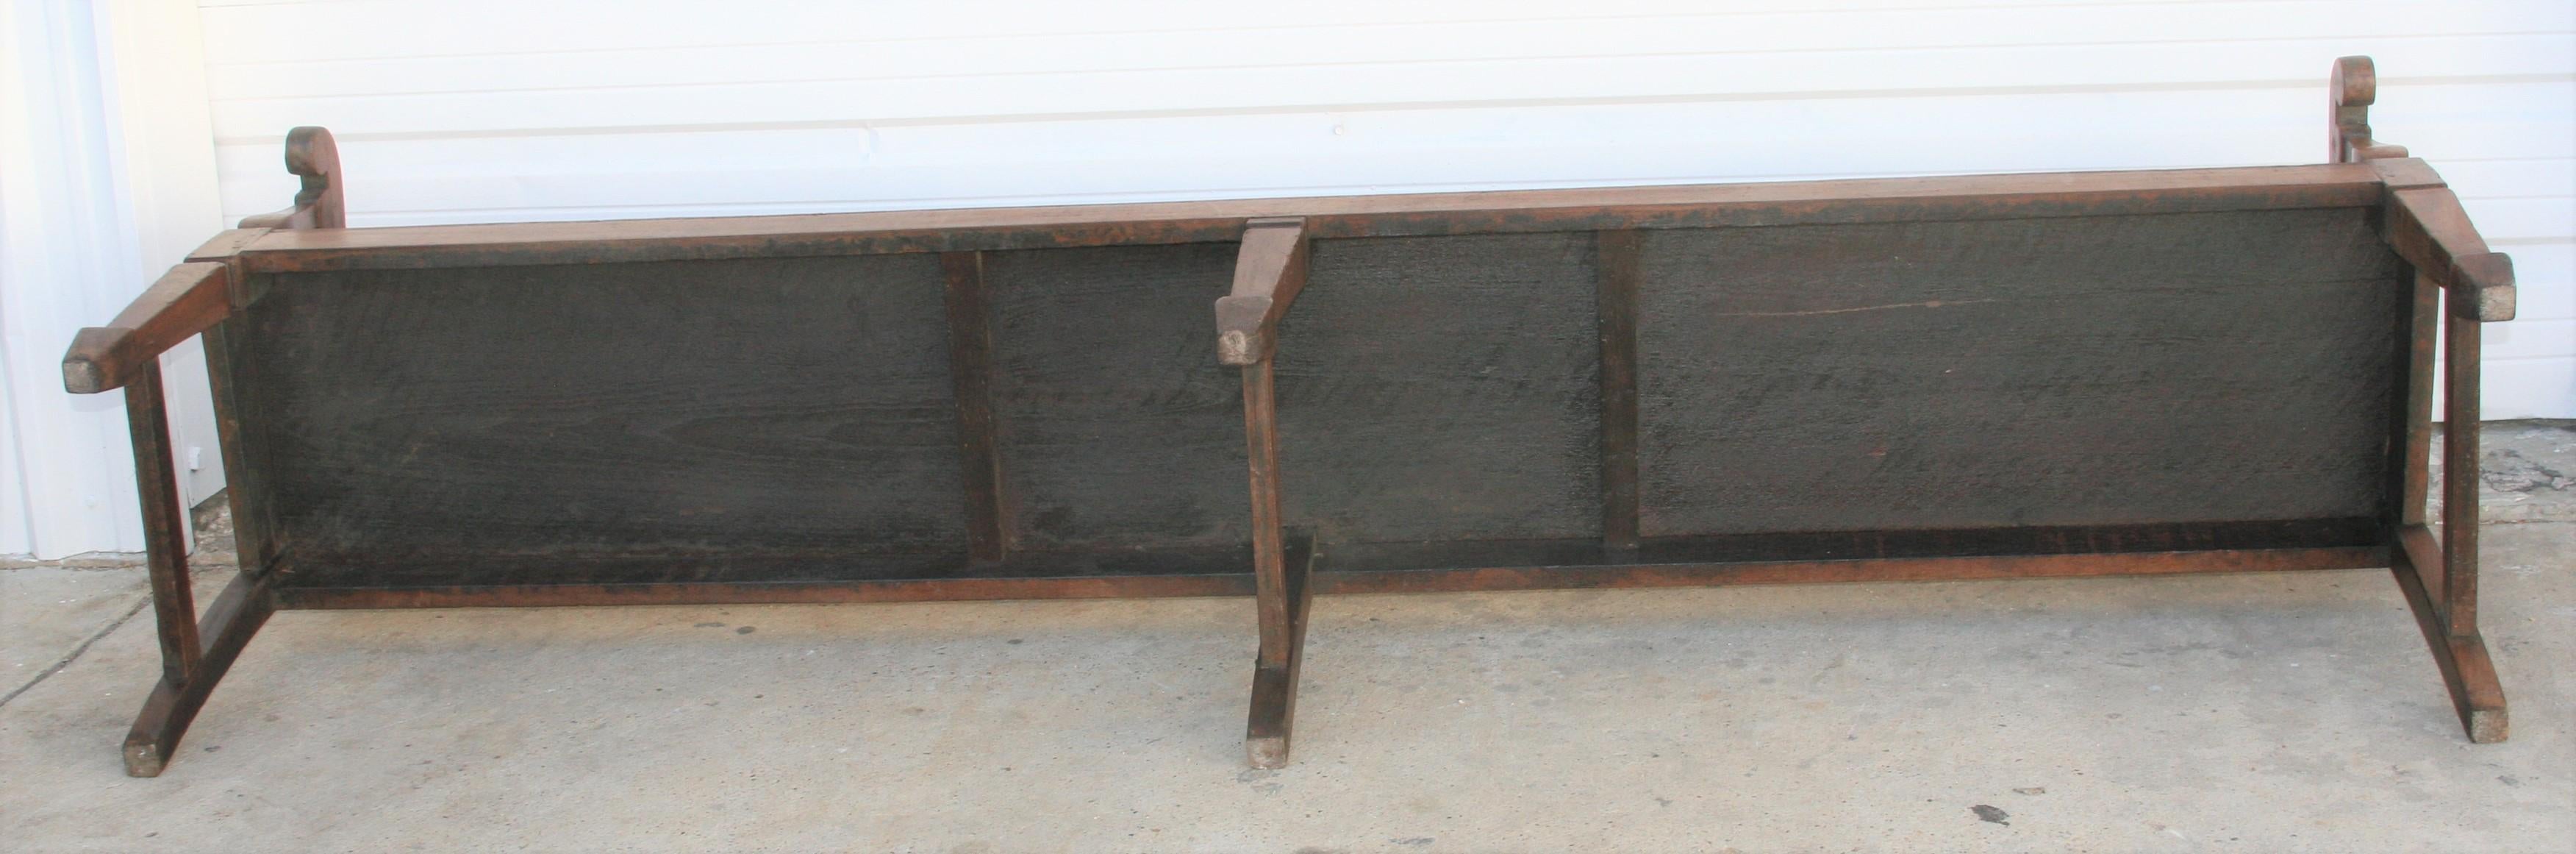 Rare 1910s Solid Teak Wood Handcrafted Bench from a Company Office 5